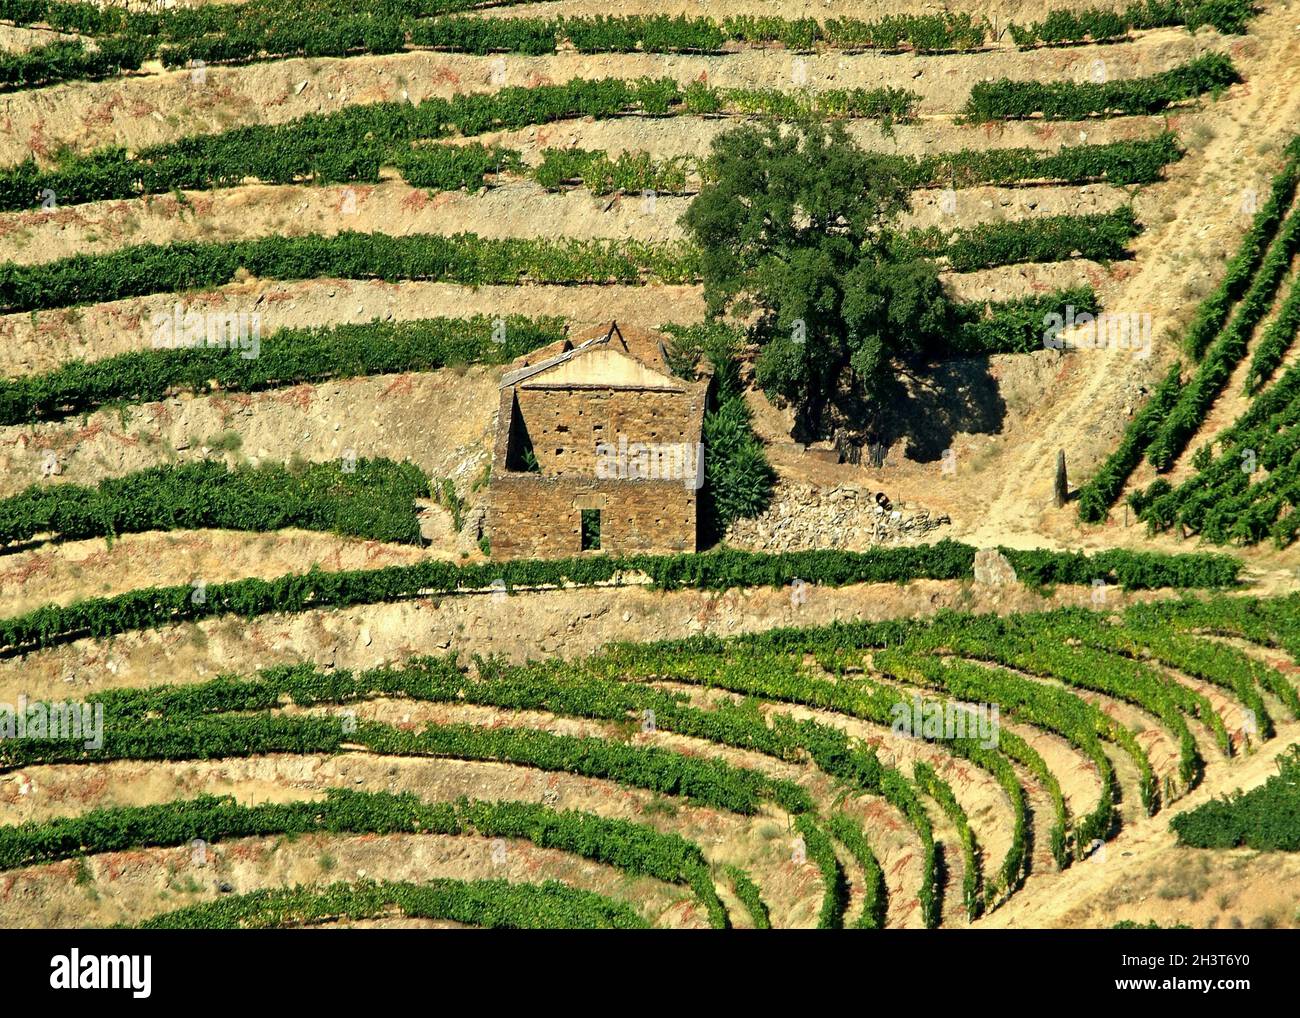 Viticulture in the Douro Valley - Portugal Stock Photo